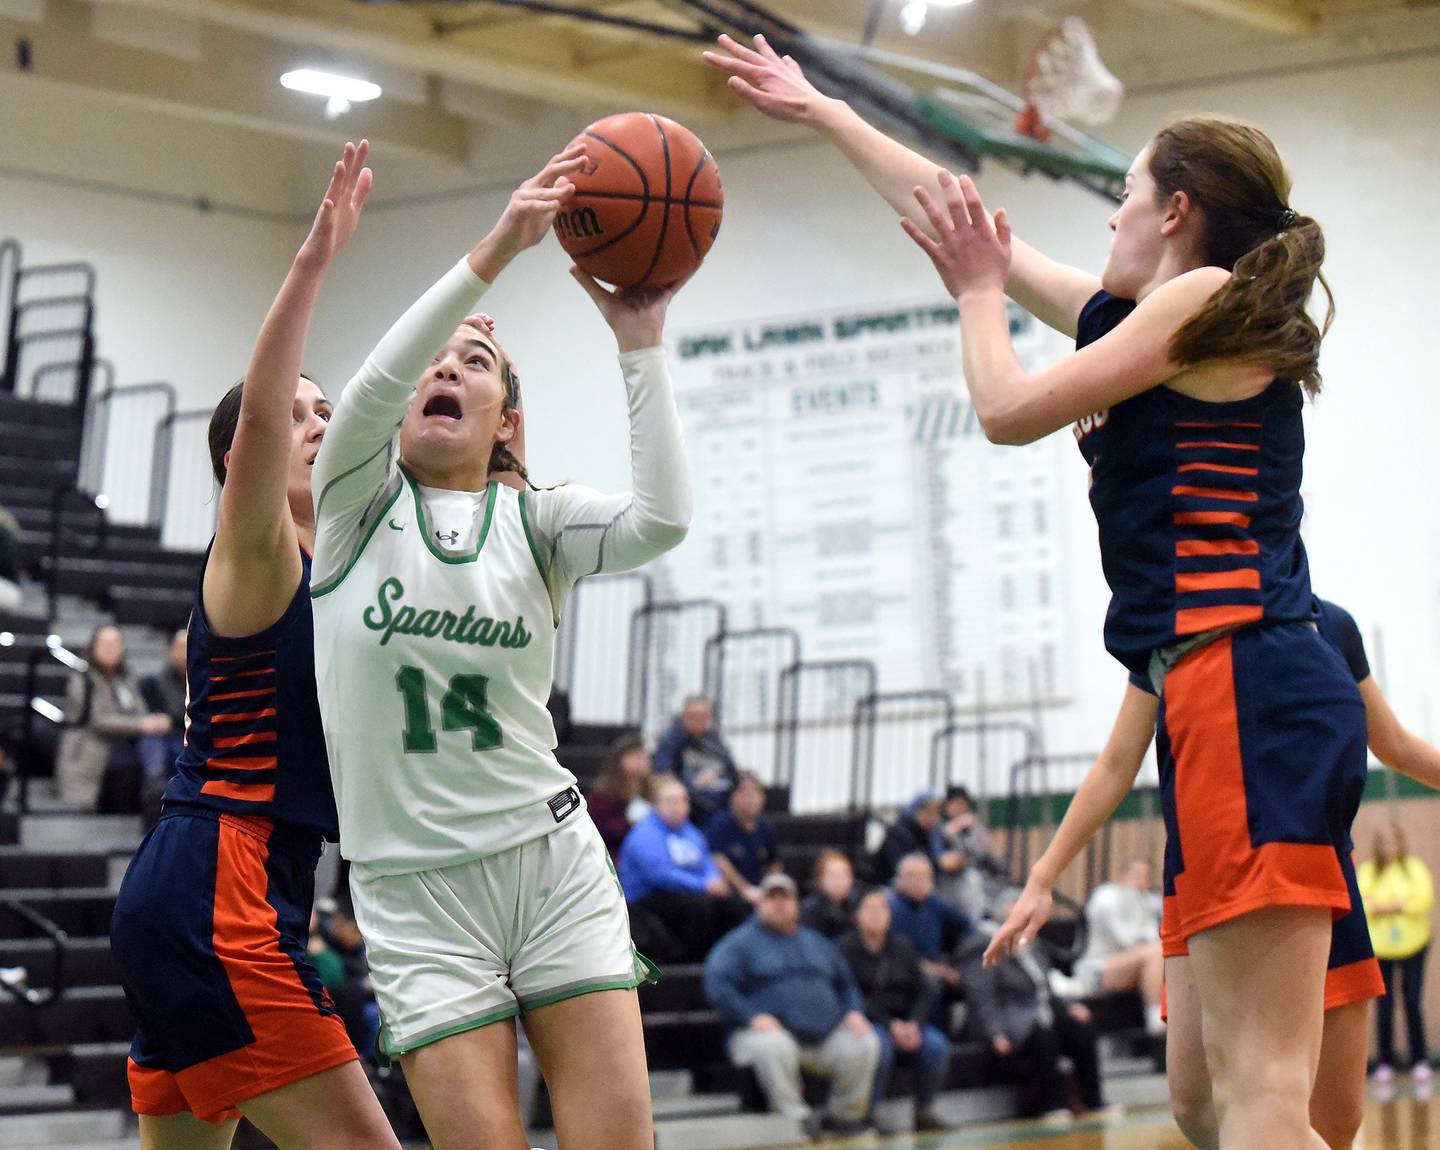 Oak Lawn's Danielle Dempsey (14) splits two Stagg defenders on her way to the basket during a nonconference game in Oak Lawn on Tuesday, Dec. 20, 2022.